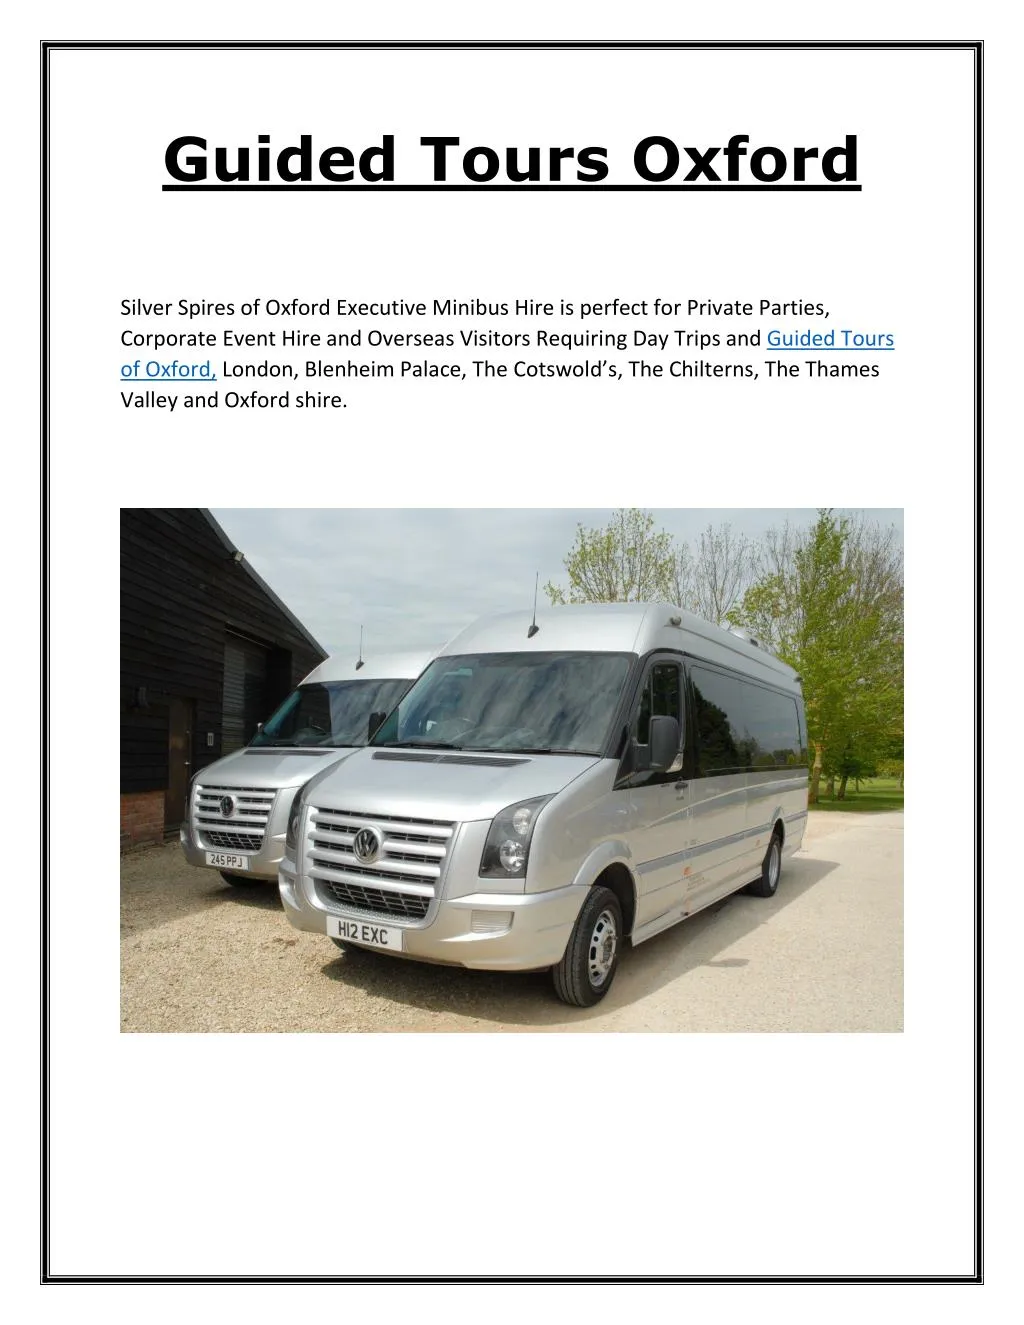 guided tours oxford